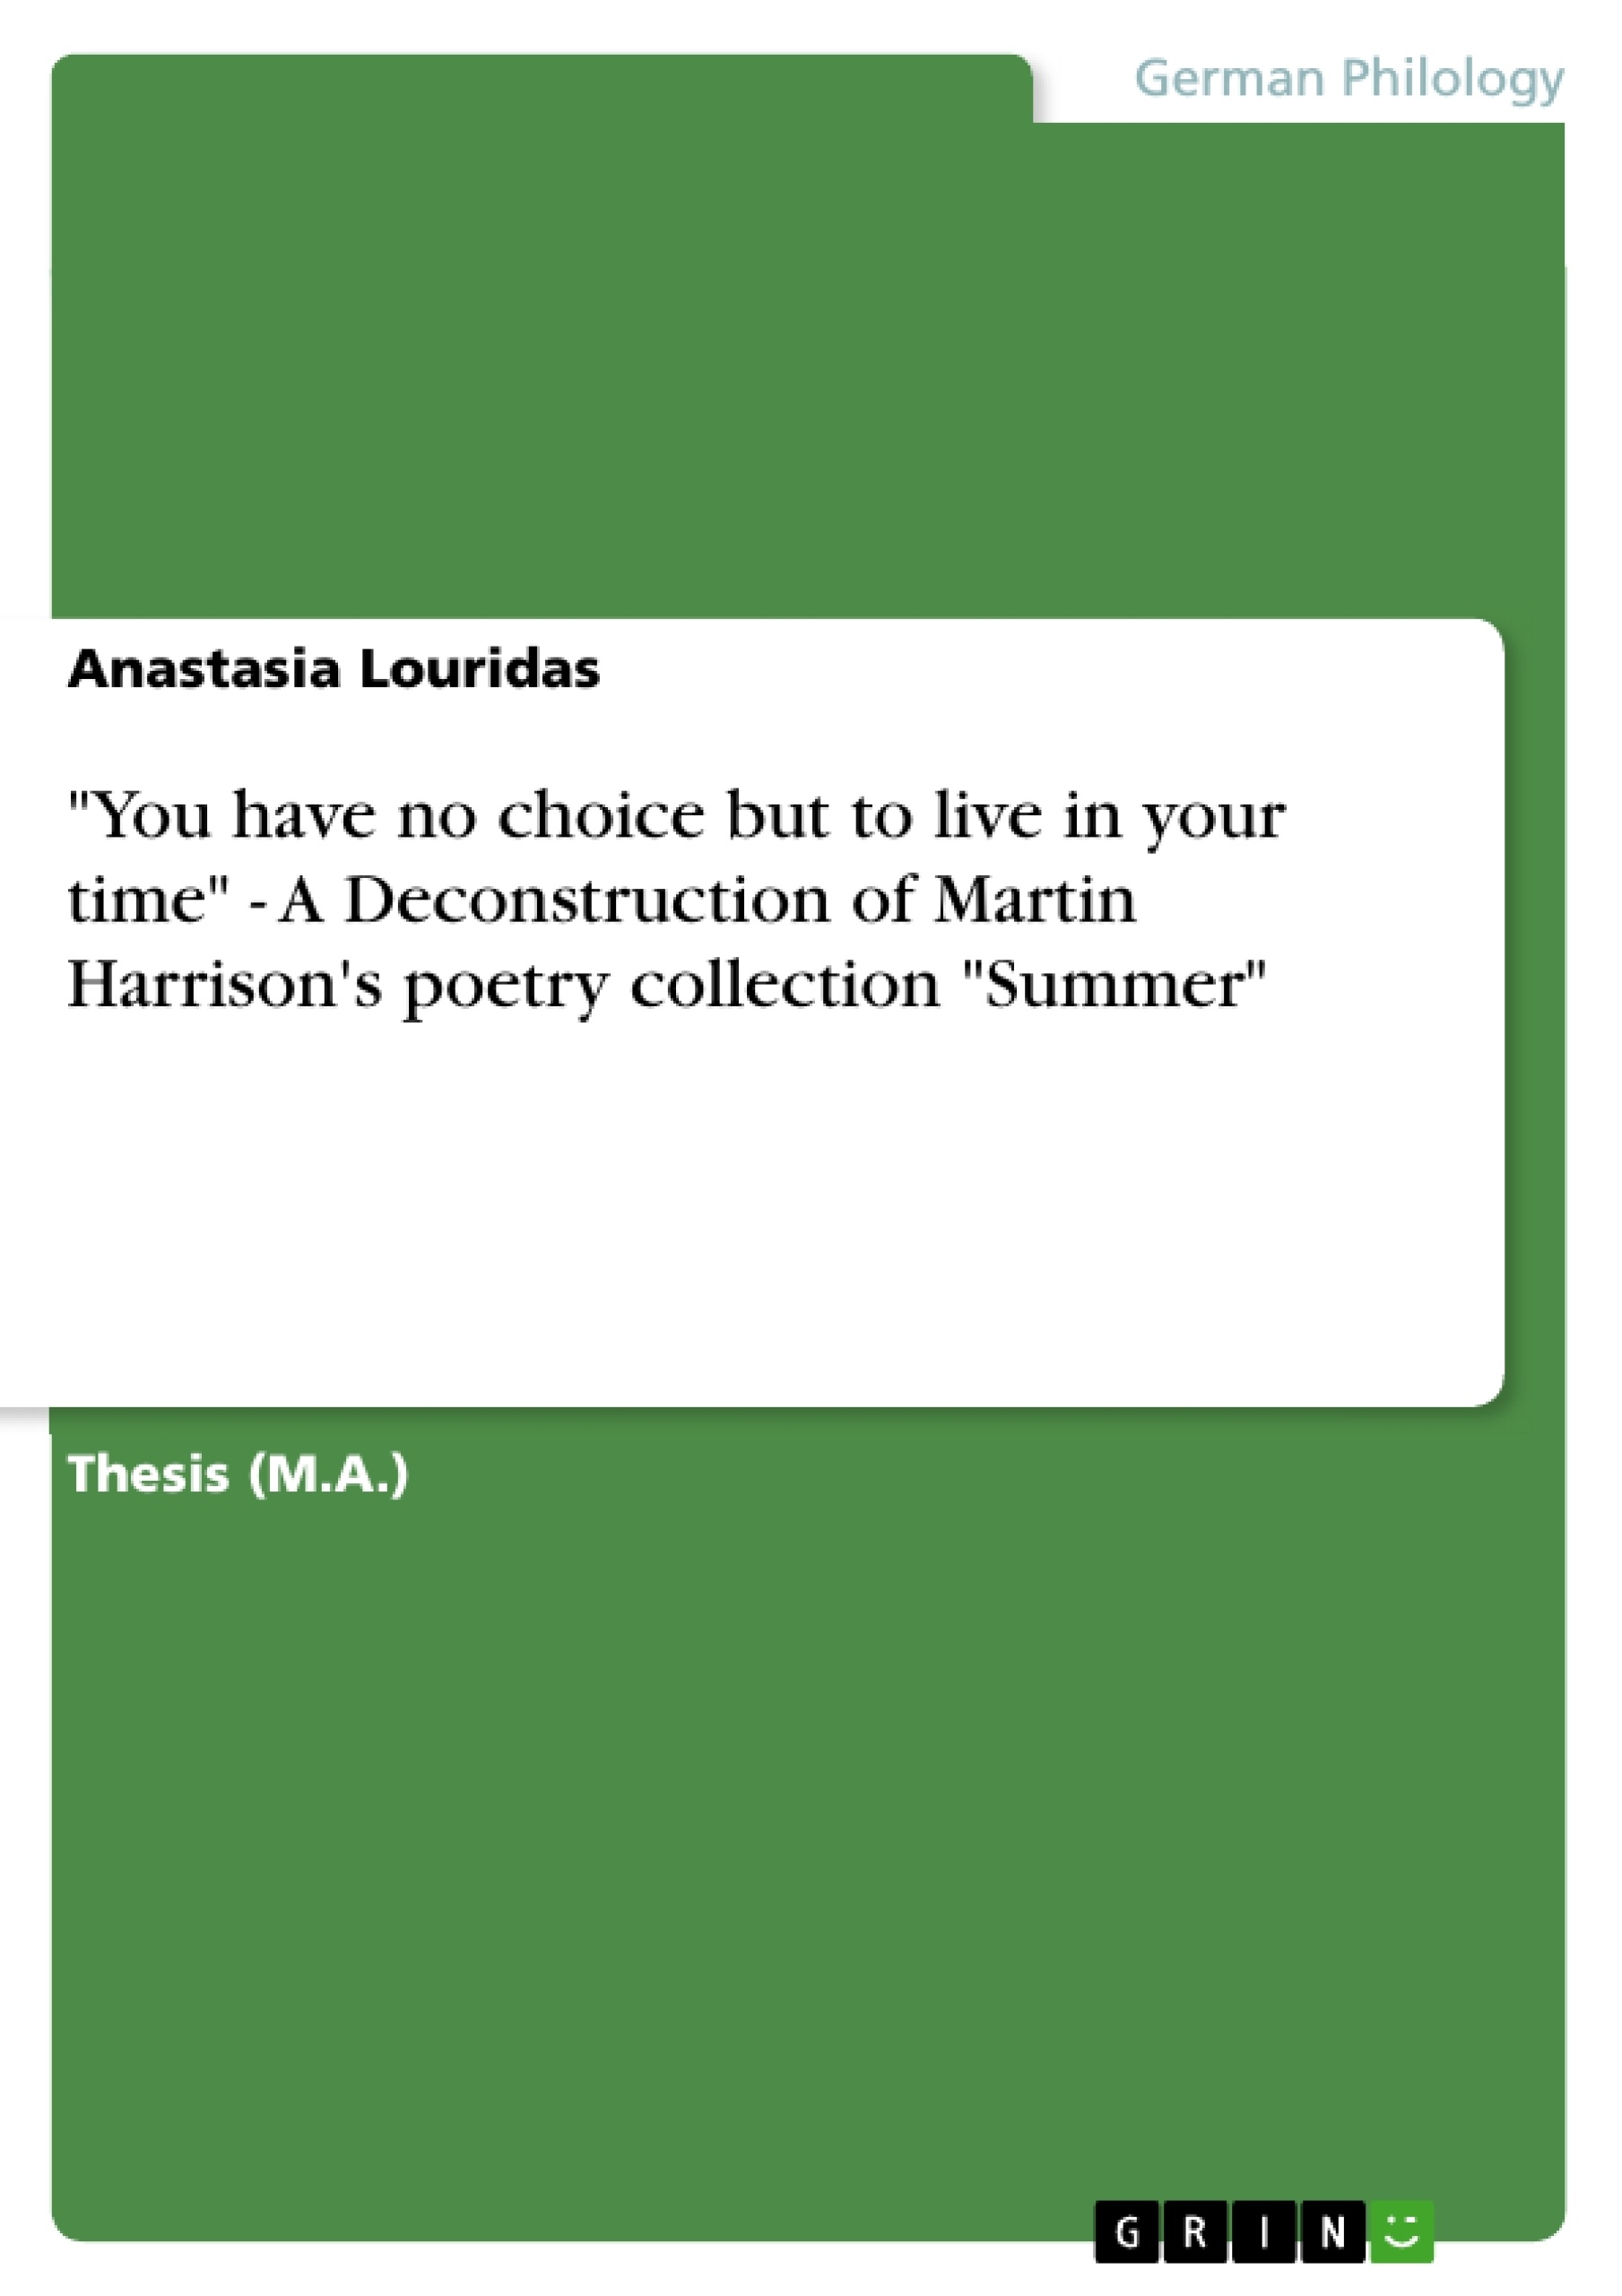 Titel: "You have no choice but to live in your time" - A Deconstruction of Martin Harrison's poetry collection "Summer"